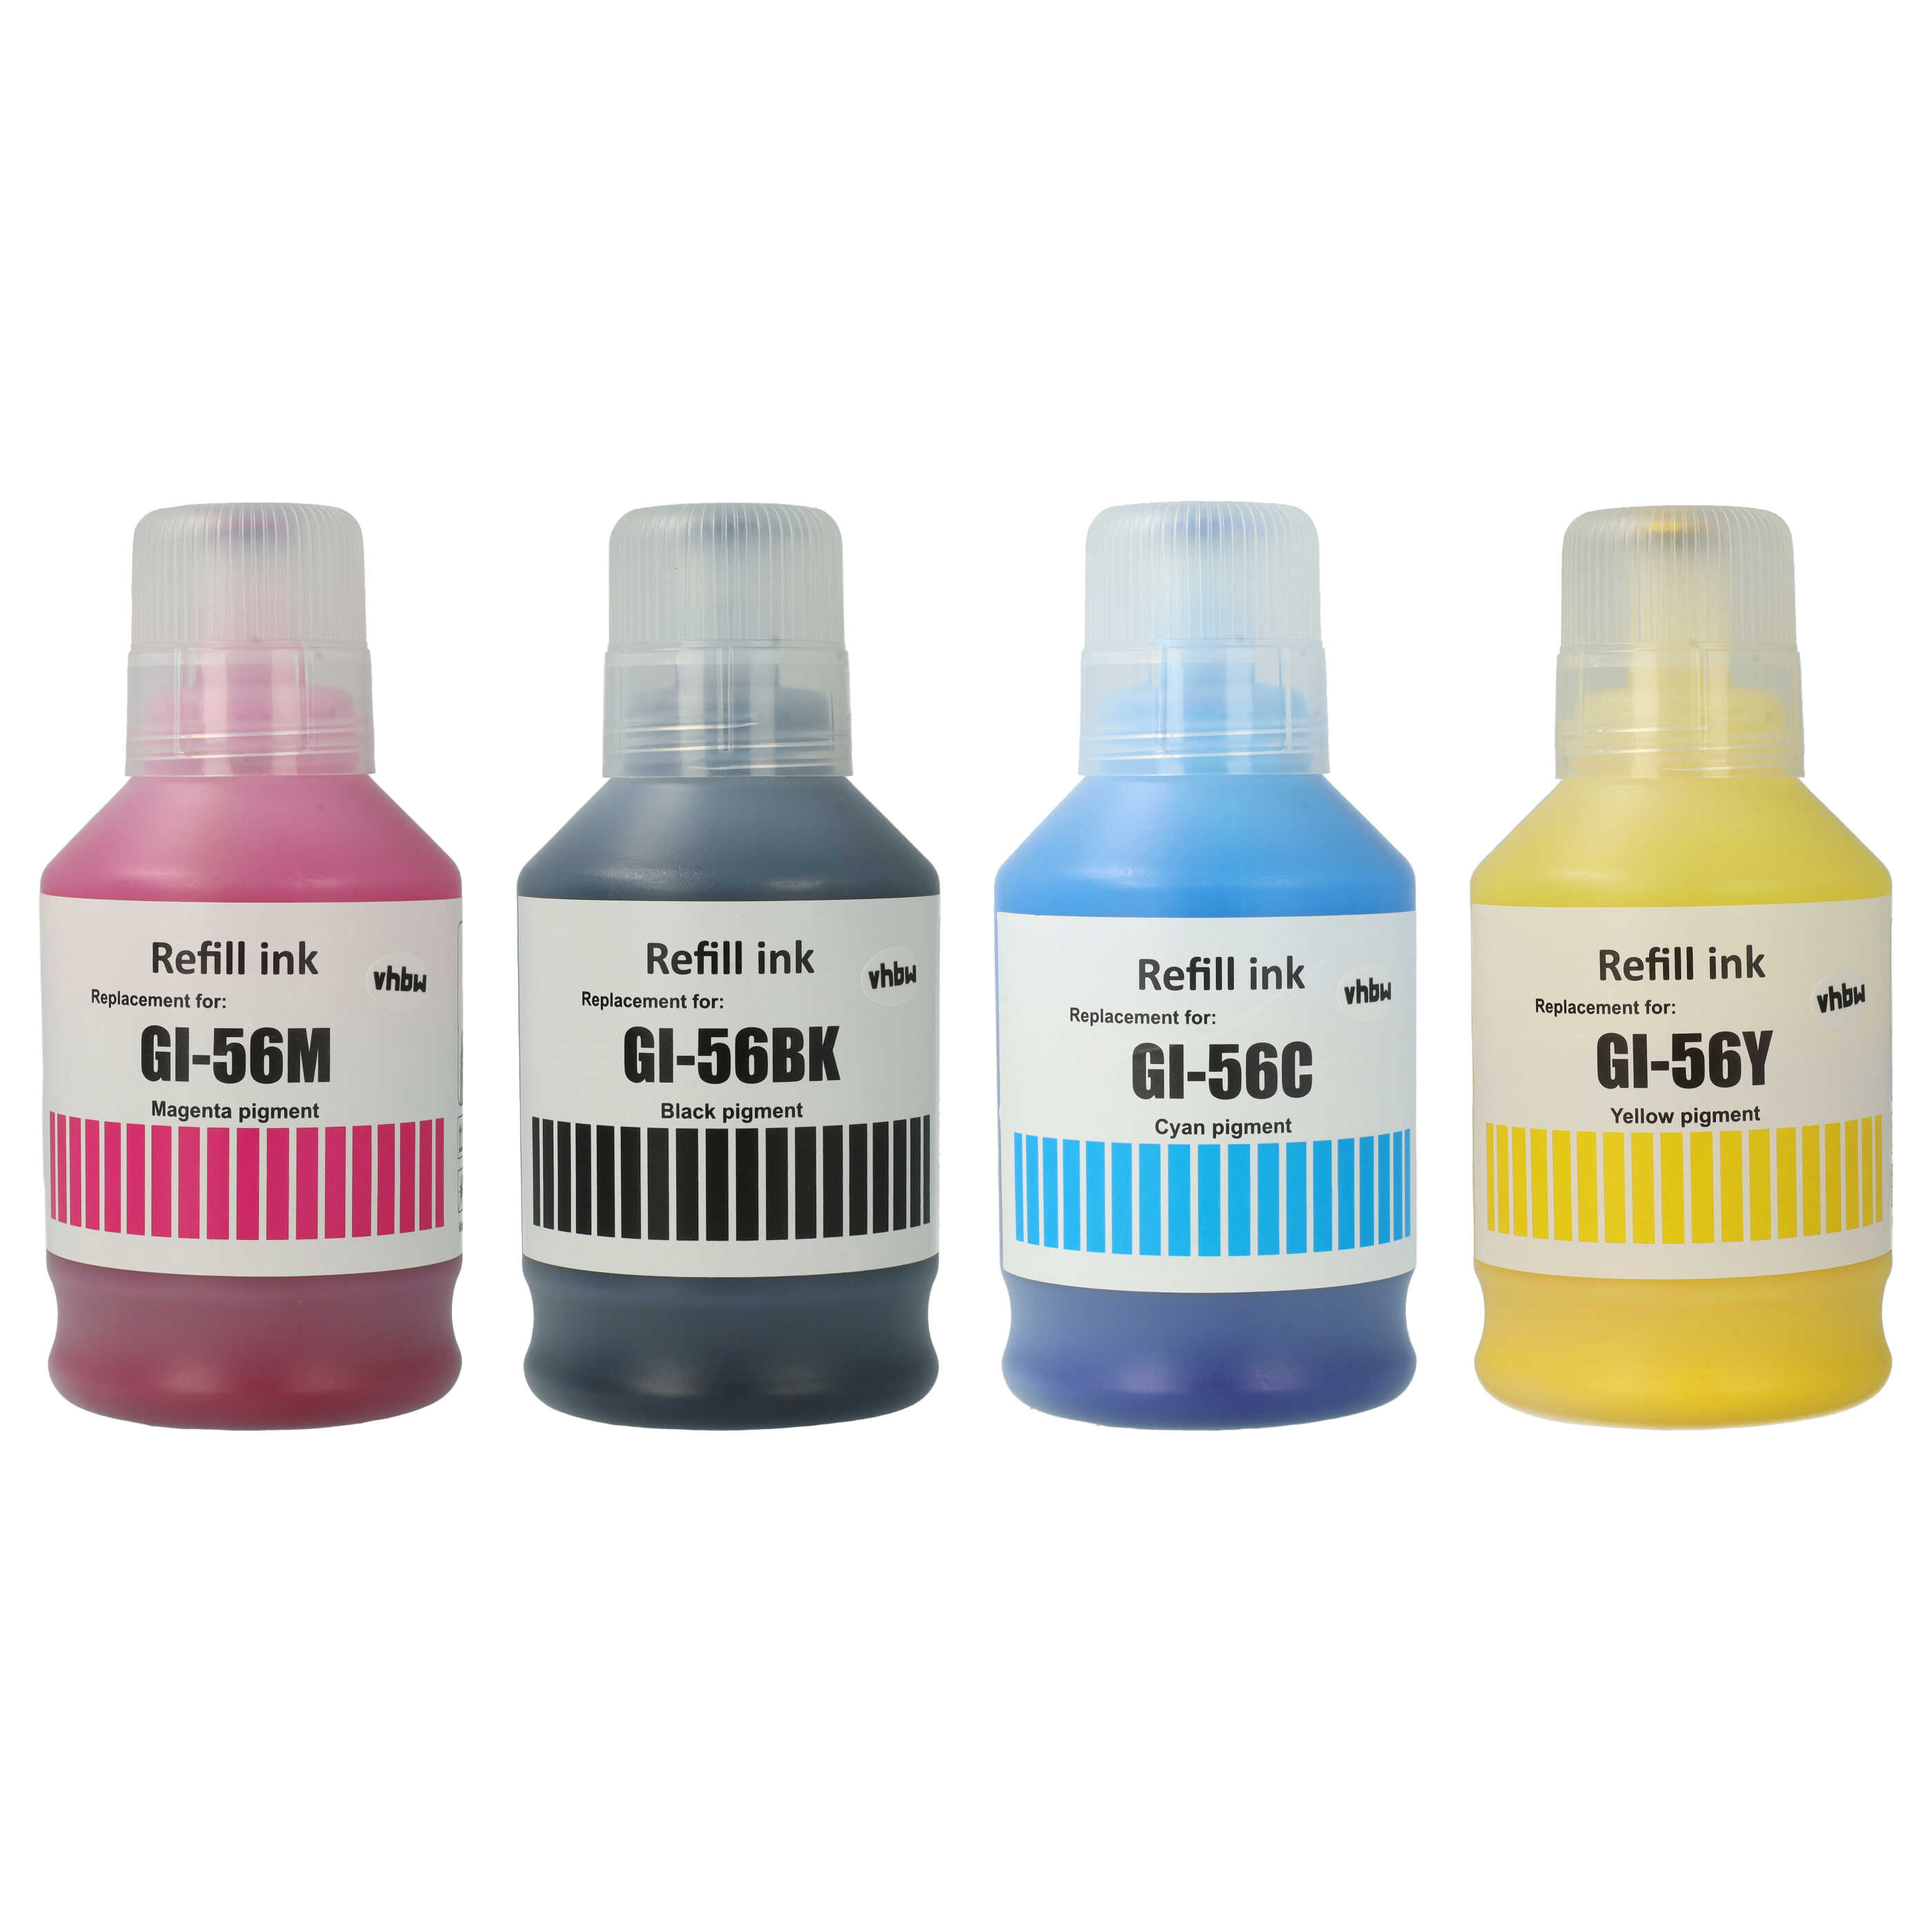 4x Refill Ink Coloured Pigmented replaces Canon 4412C001, 4431C001, 4430C001 for Canon Printers - refill set